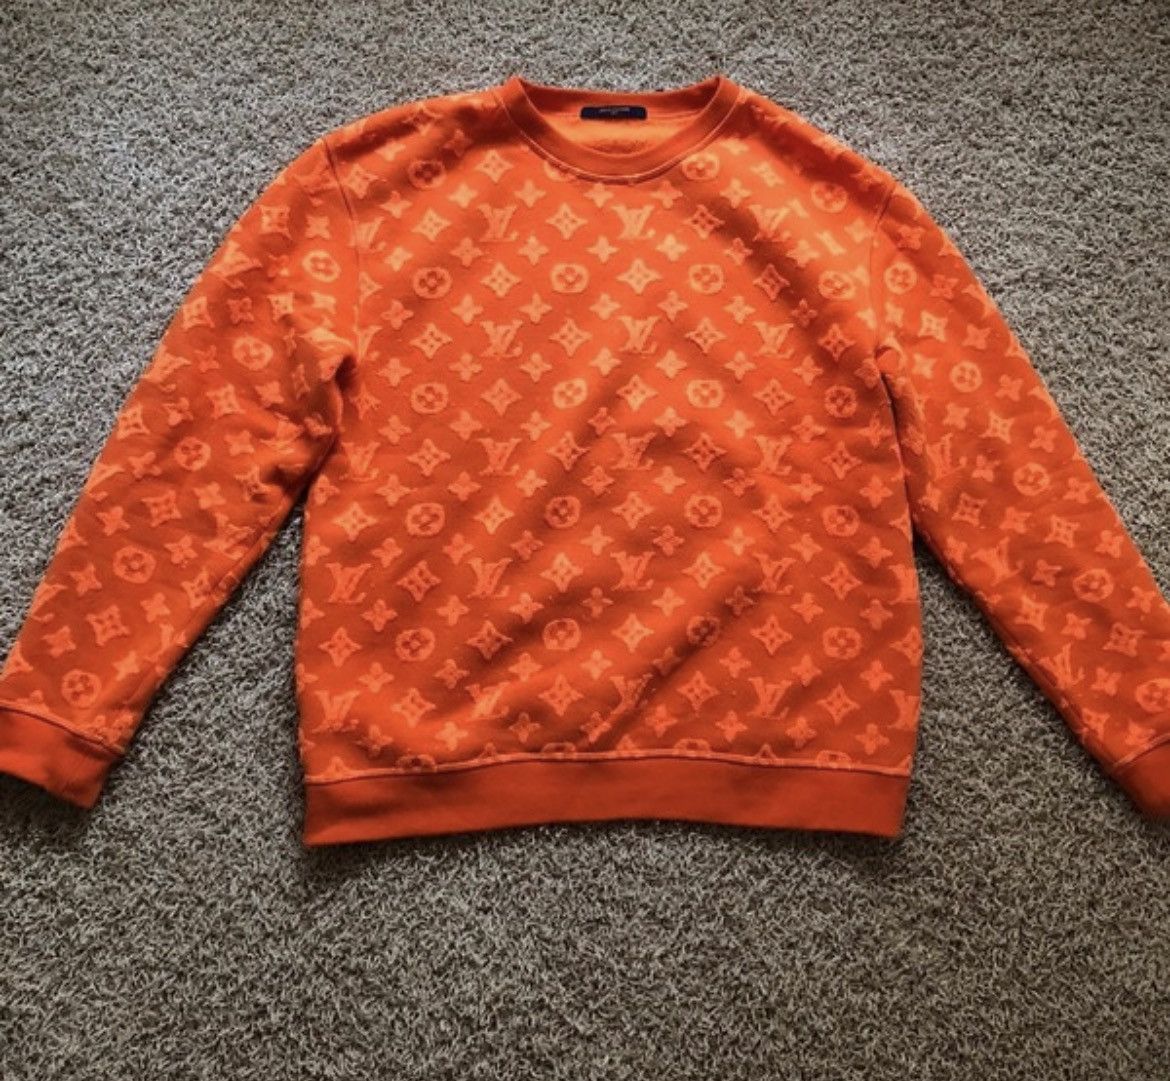 Louis Vuitton - Authenticated Sweatshirt - Polyester Orange Abstract for Men, Very Good Condition